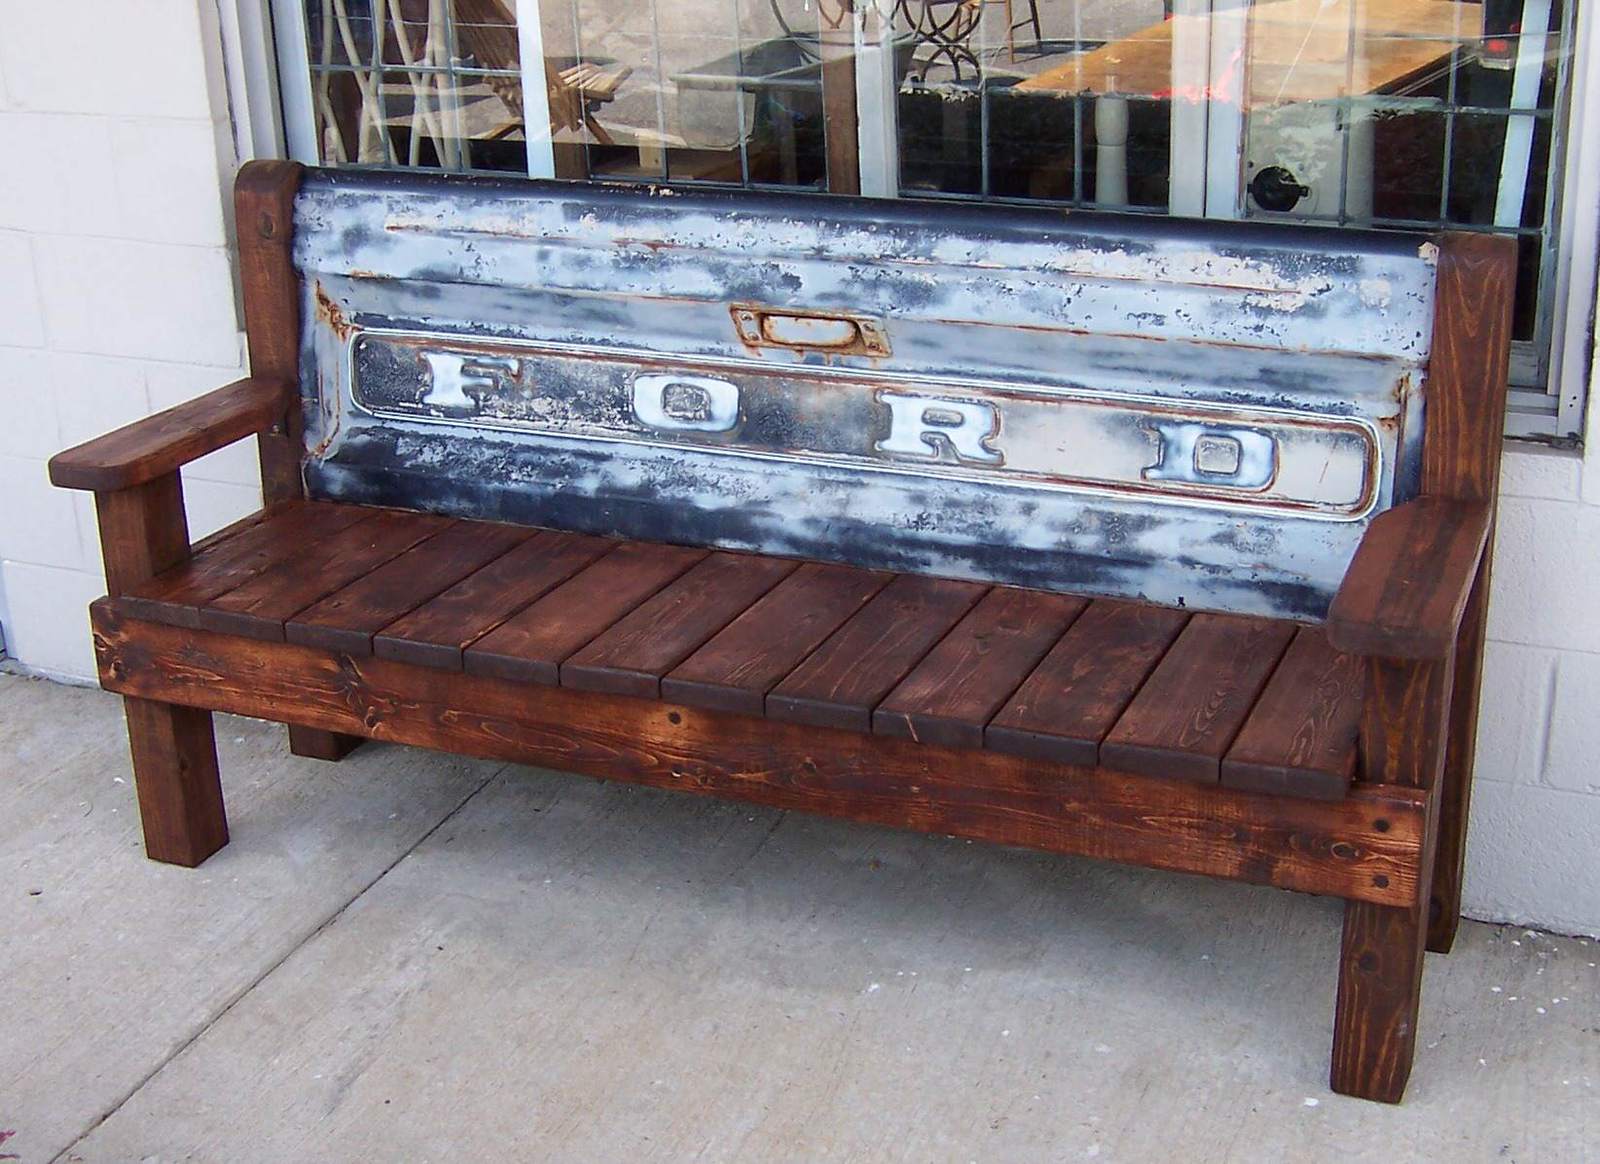 Upcycled Furniture Ideas For A Sustainable Home